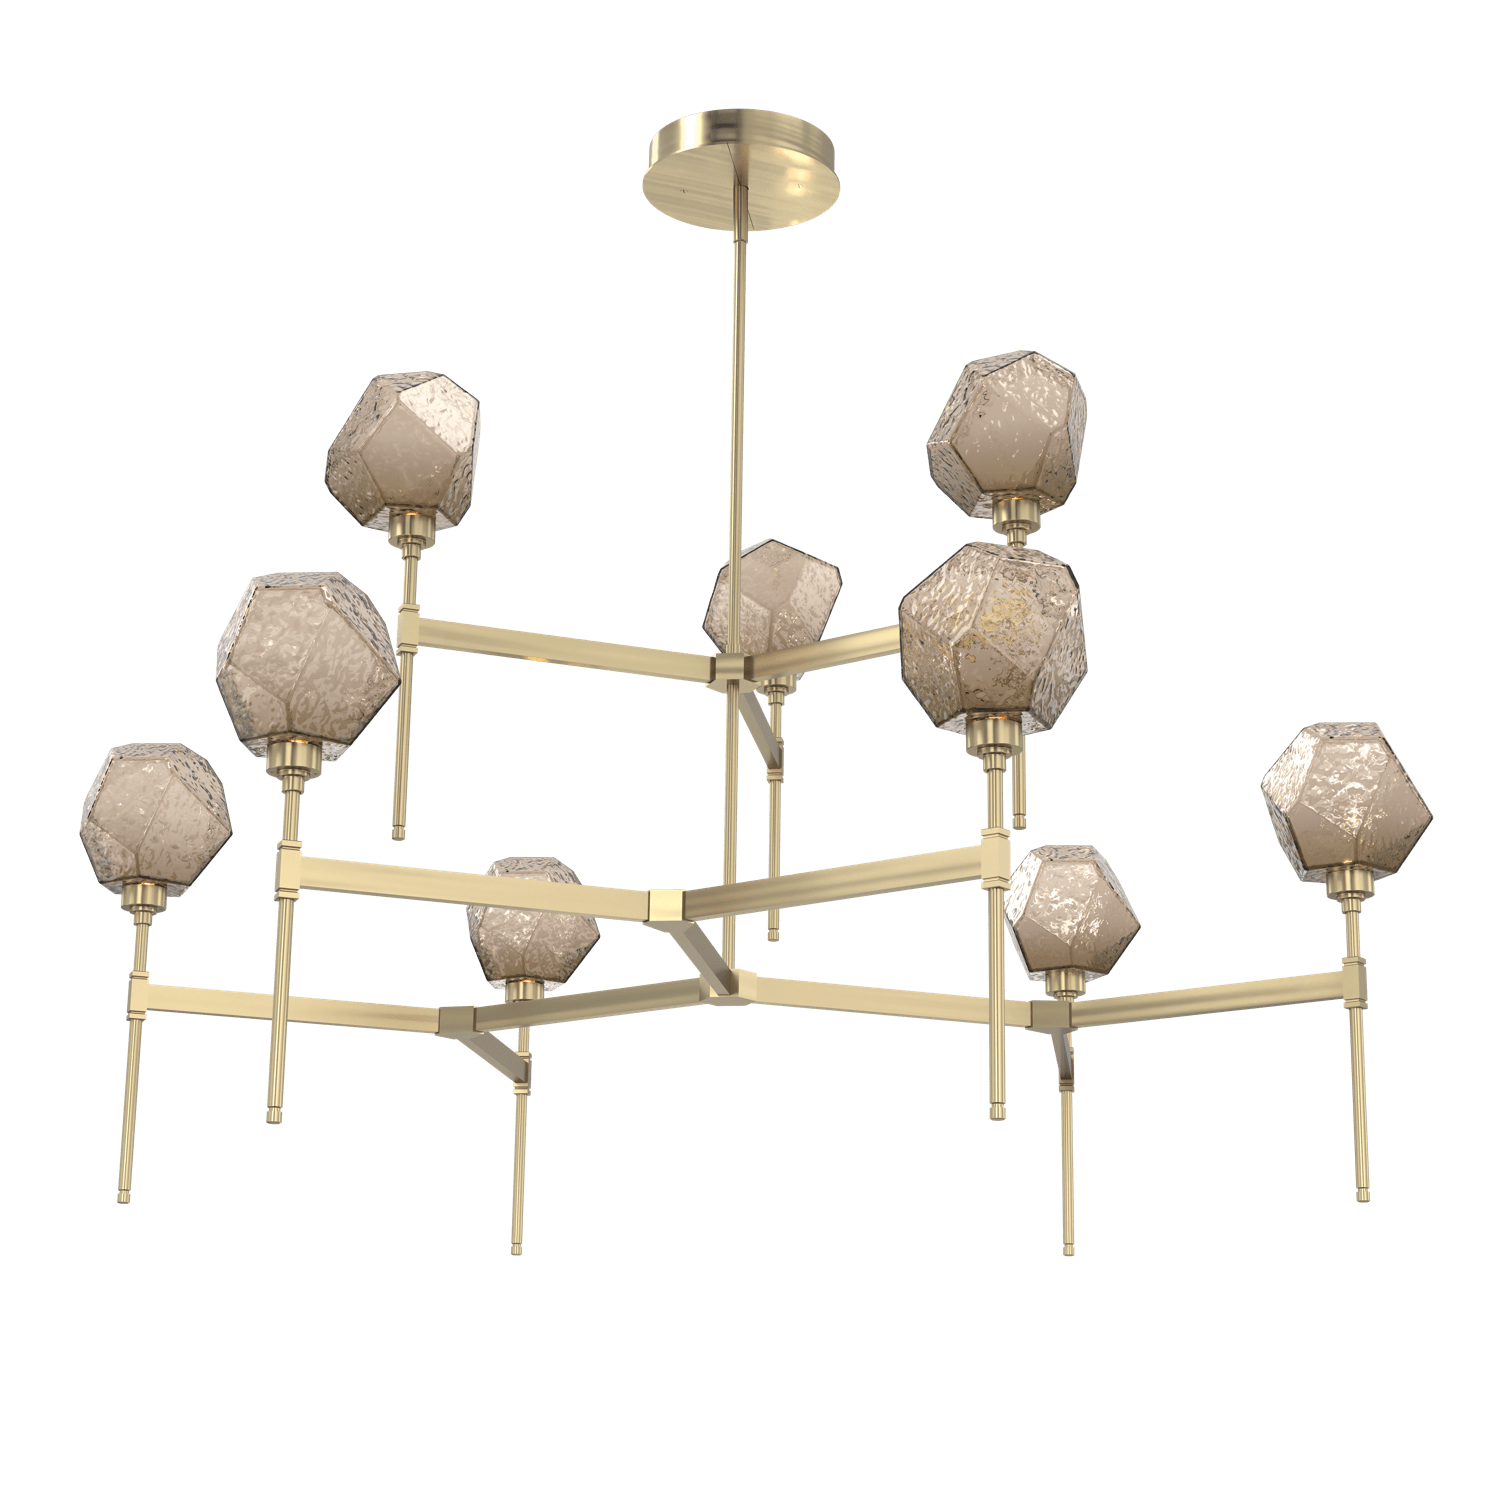 CHB0039-55-HB-B-Hammerton-Studio-Gem-round-two-tier-belvedere-chandelier-with-heritage-brass-finish-and-bronze-blown-glass-shades-and-LED-lamping